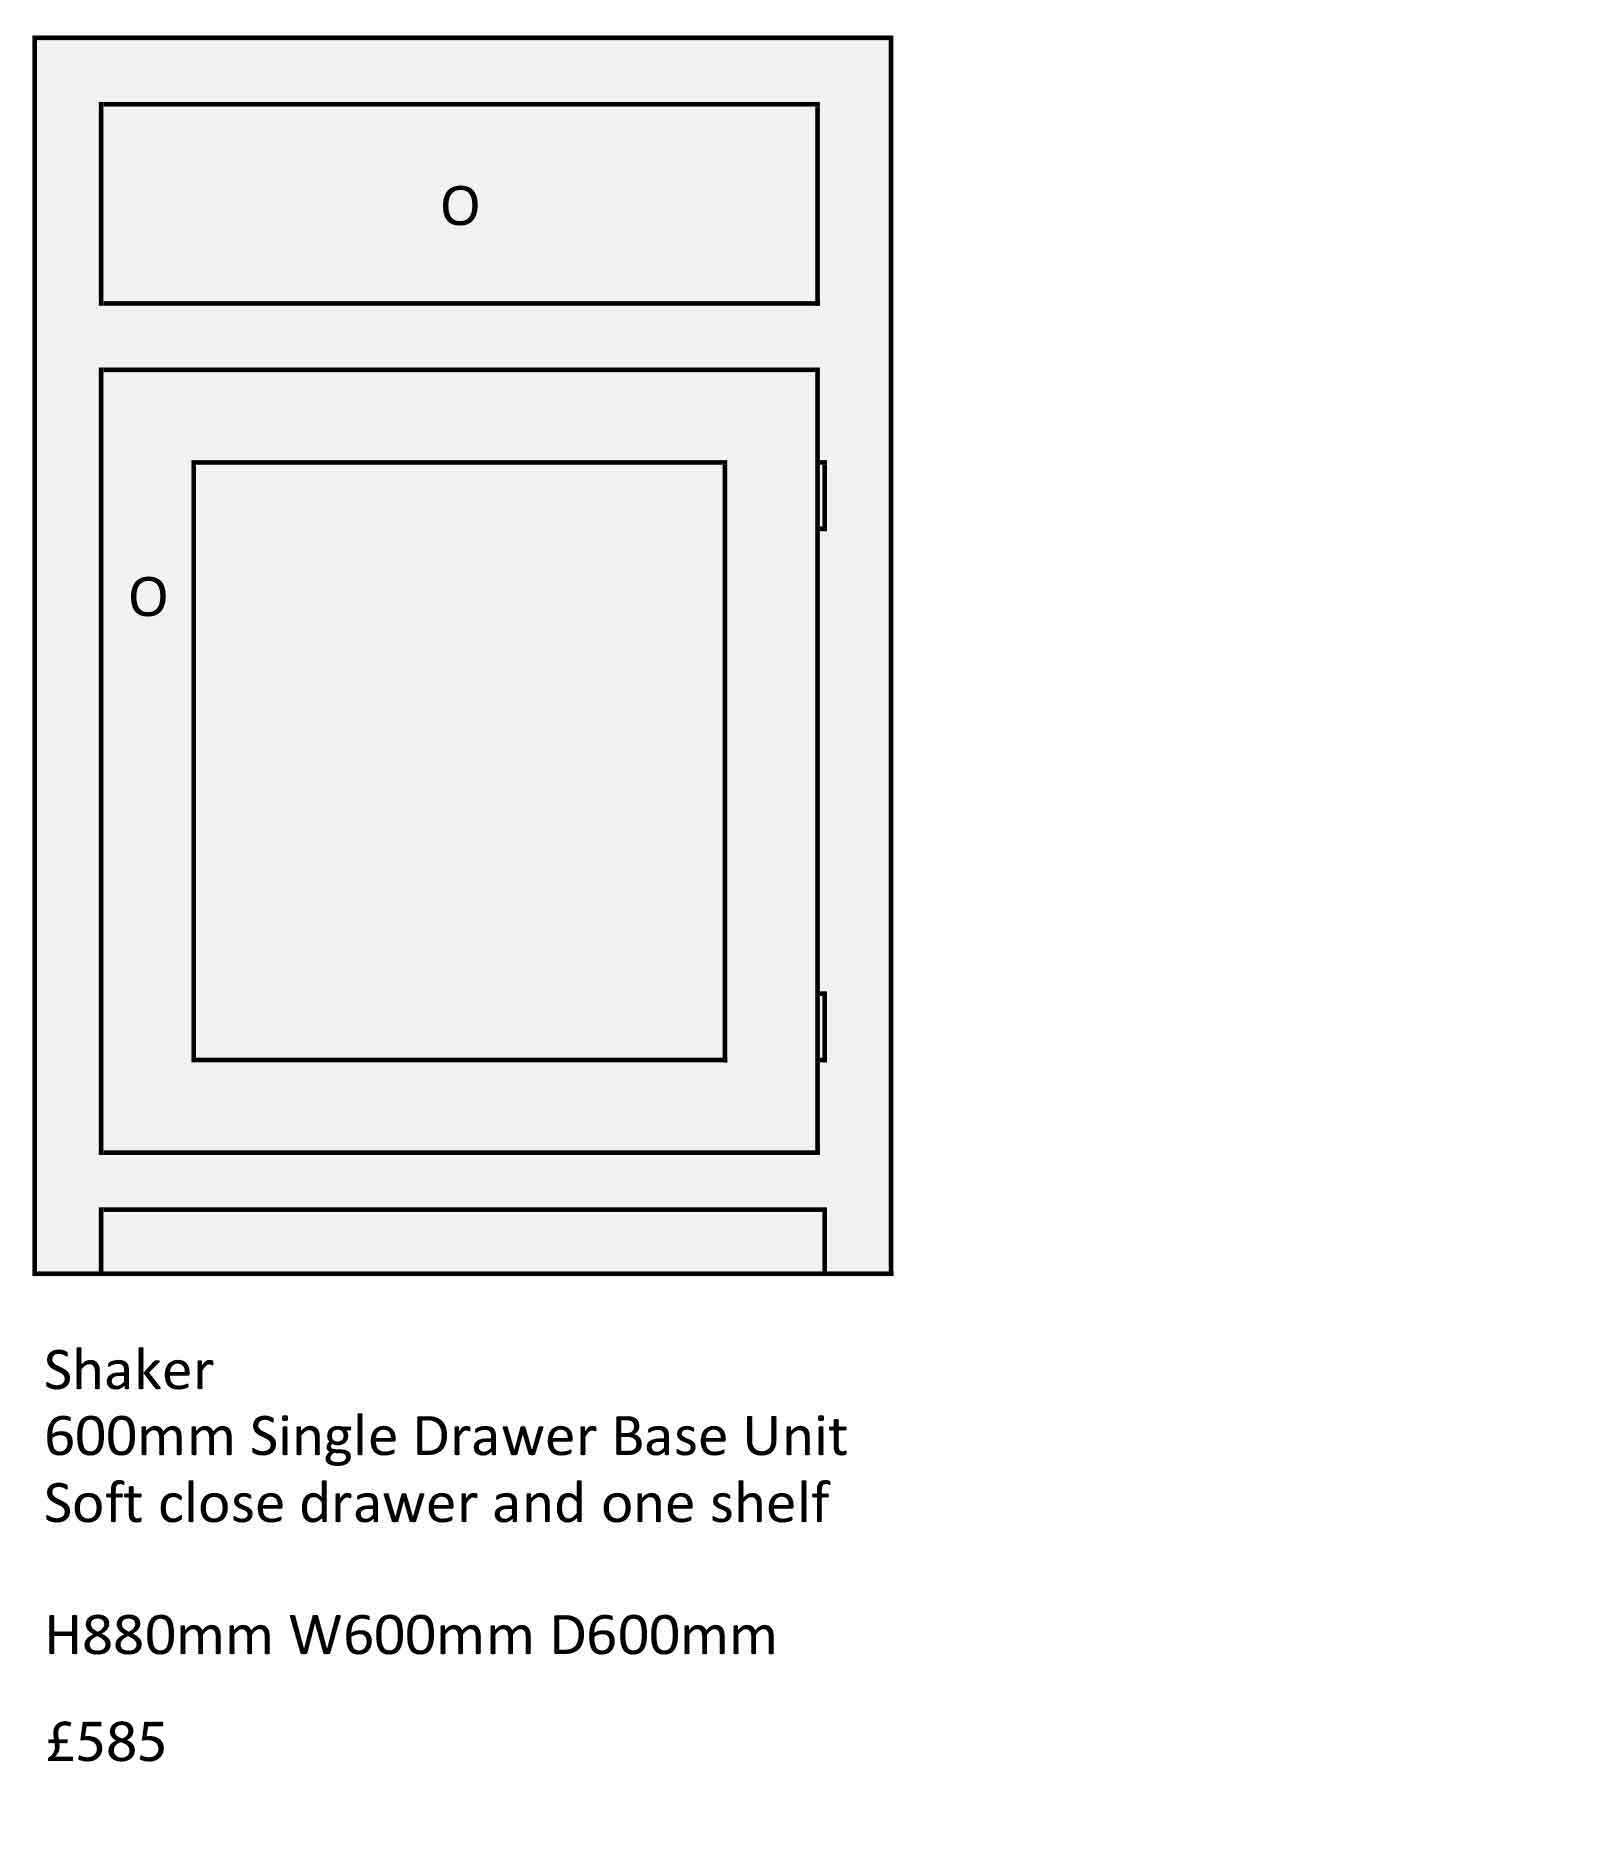 Shaker kitchen cabinet, 600mm Single Drawer Base Unit, solid wood kitchen designs from The Bramble Tree